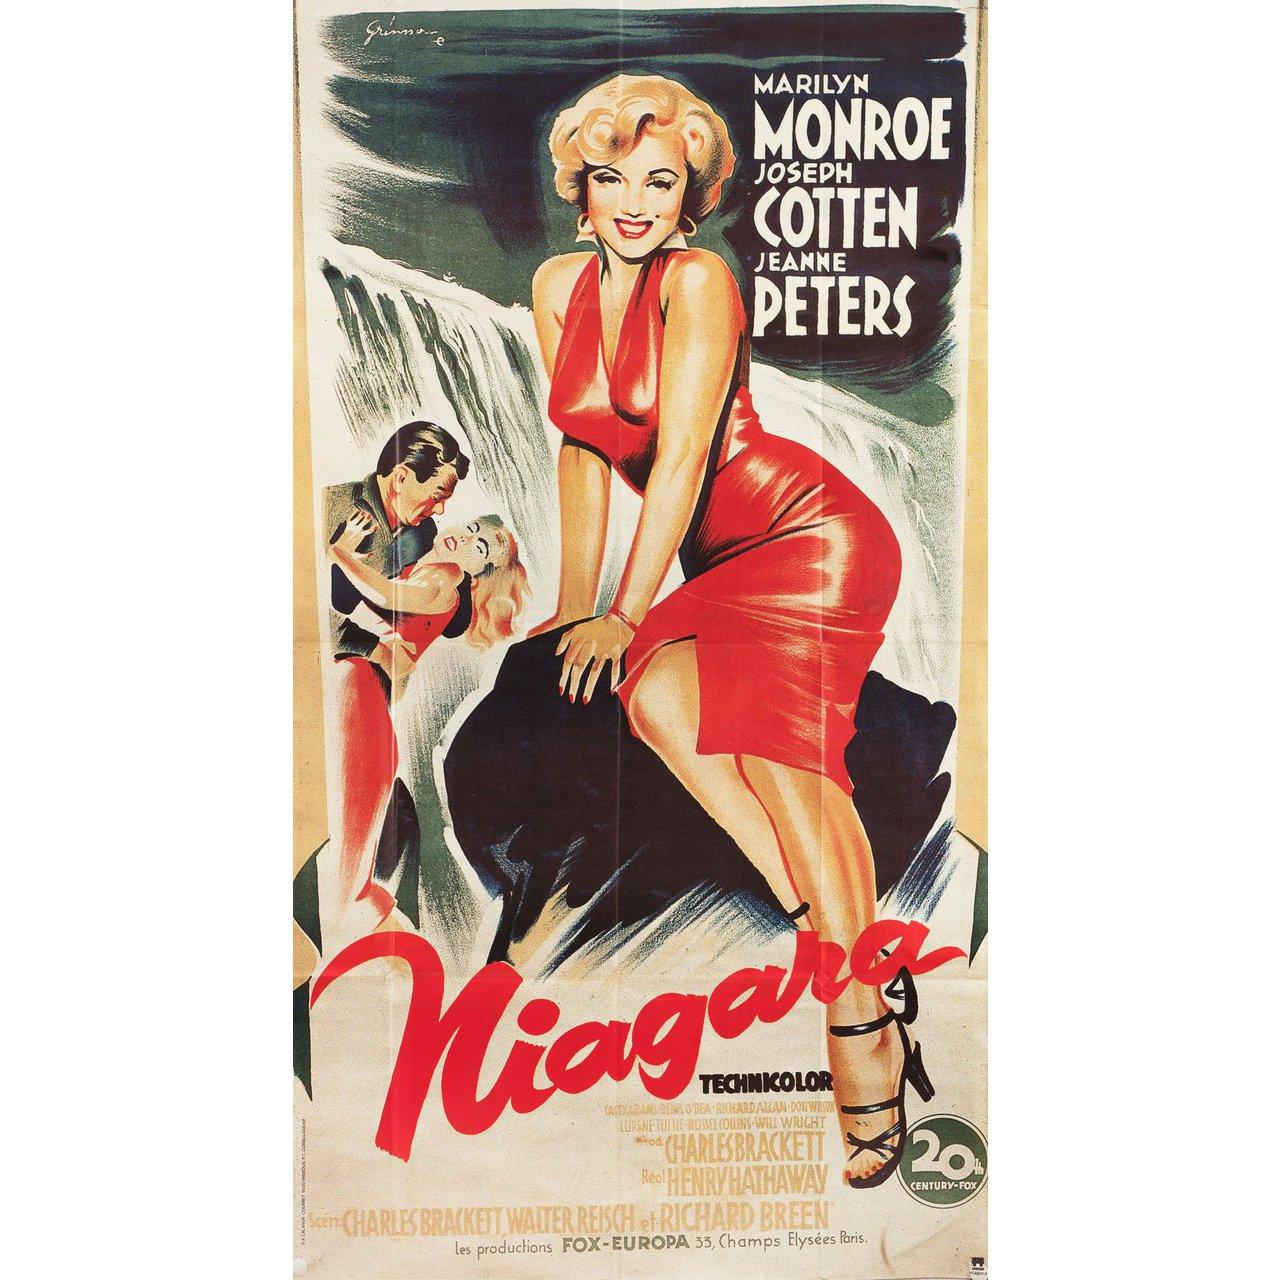 Original 1980s re-release French pantalon poster by Boris Grinsson for the 1953 film Niagara directed by Henry Hathaway with Marilyn Monroe / Joseph Cotten / Jean Peters / Max Showalter. Very Good-Fine condition, folded. Many original posters were